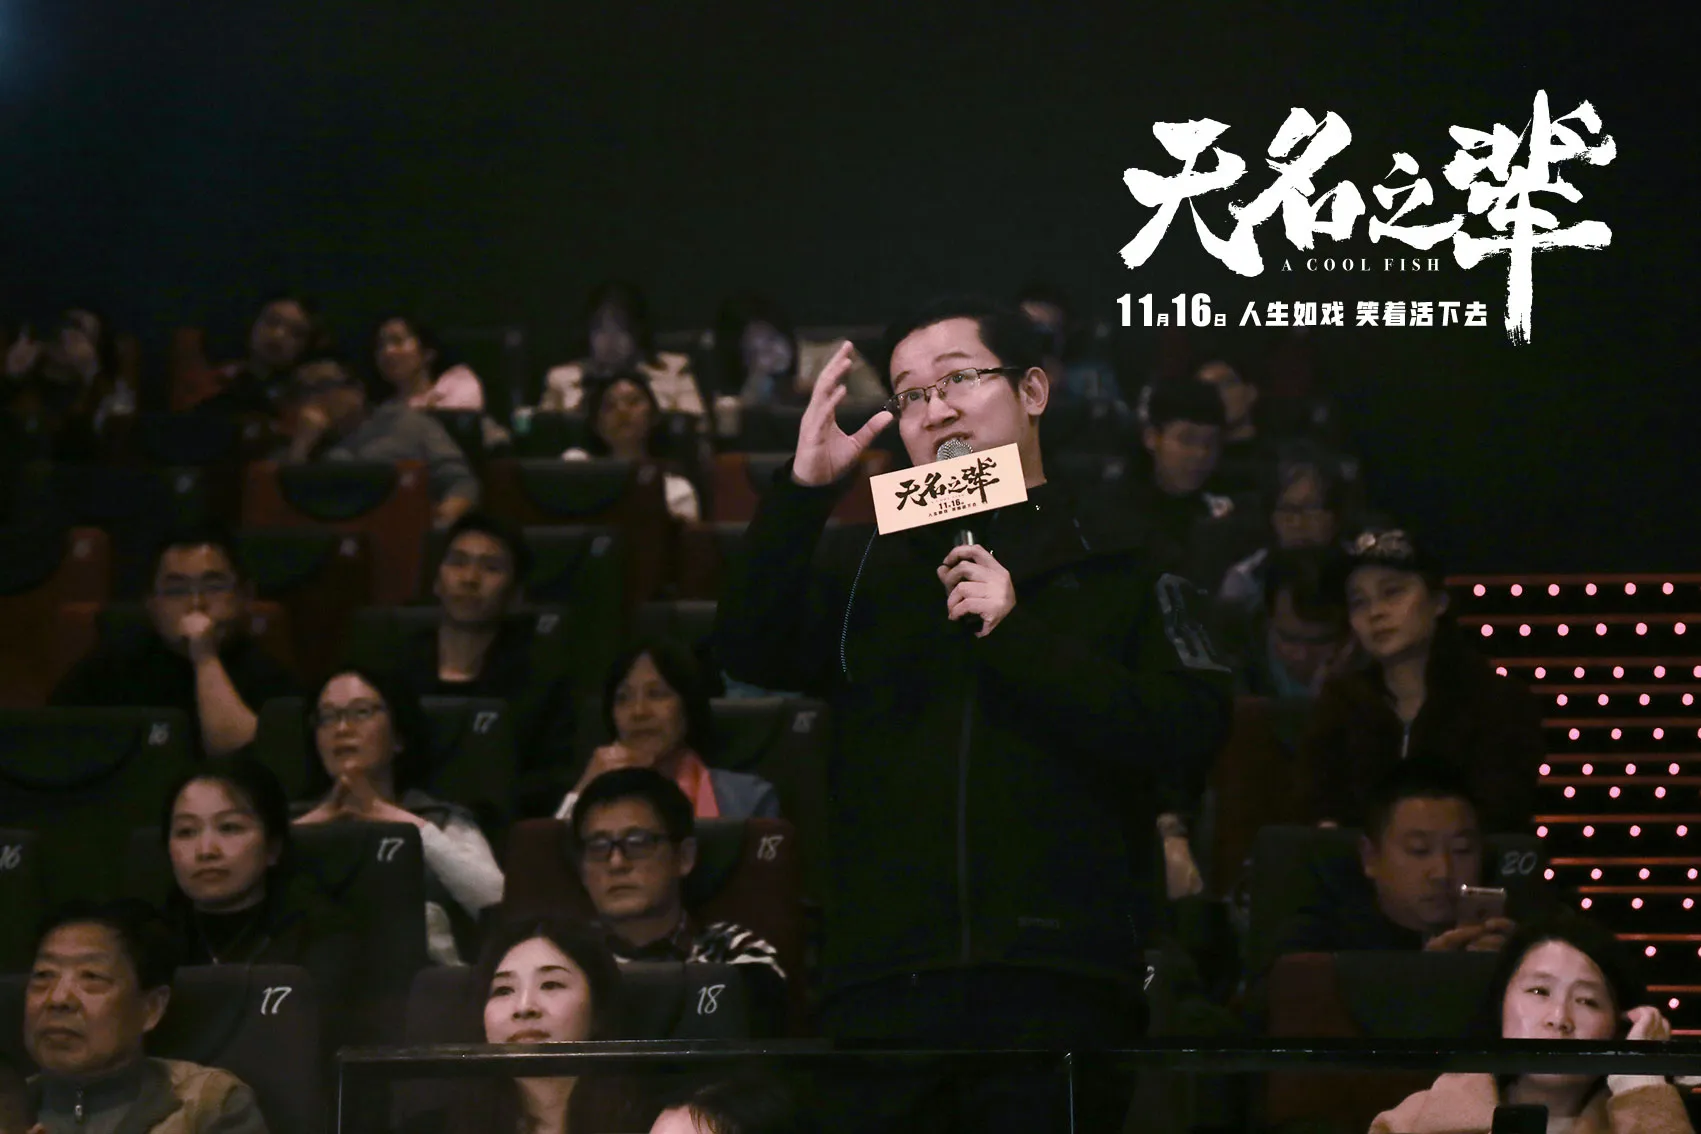 Live audience laughs about life. JPG